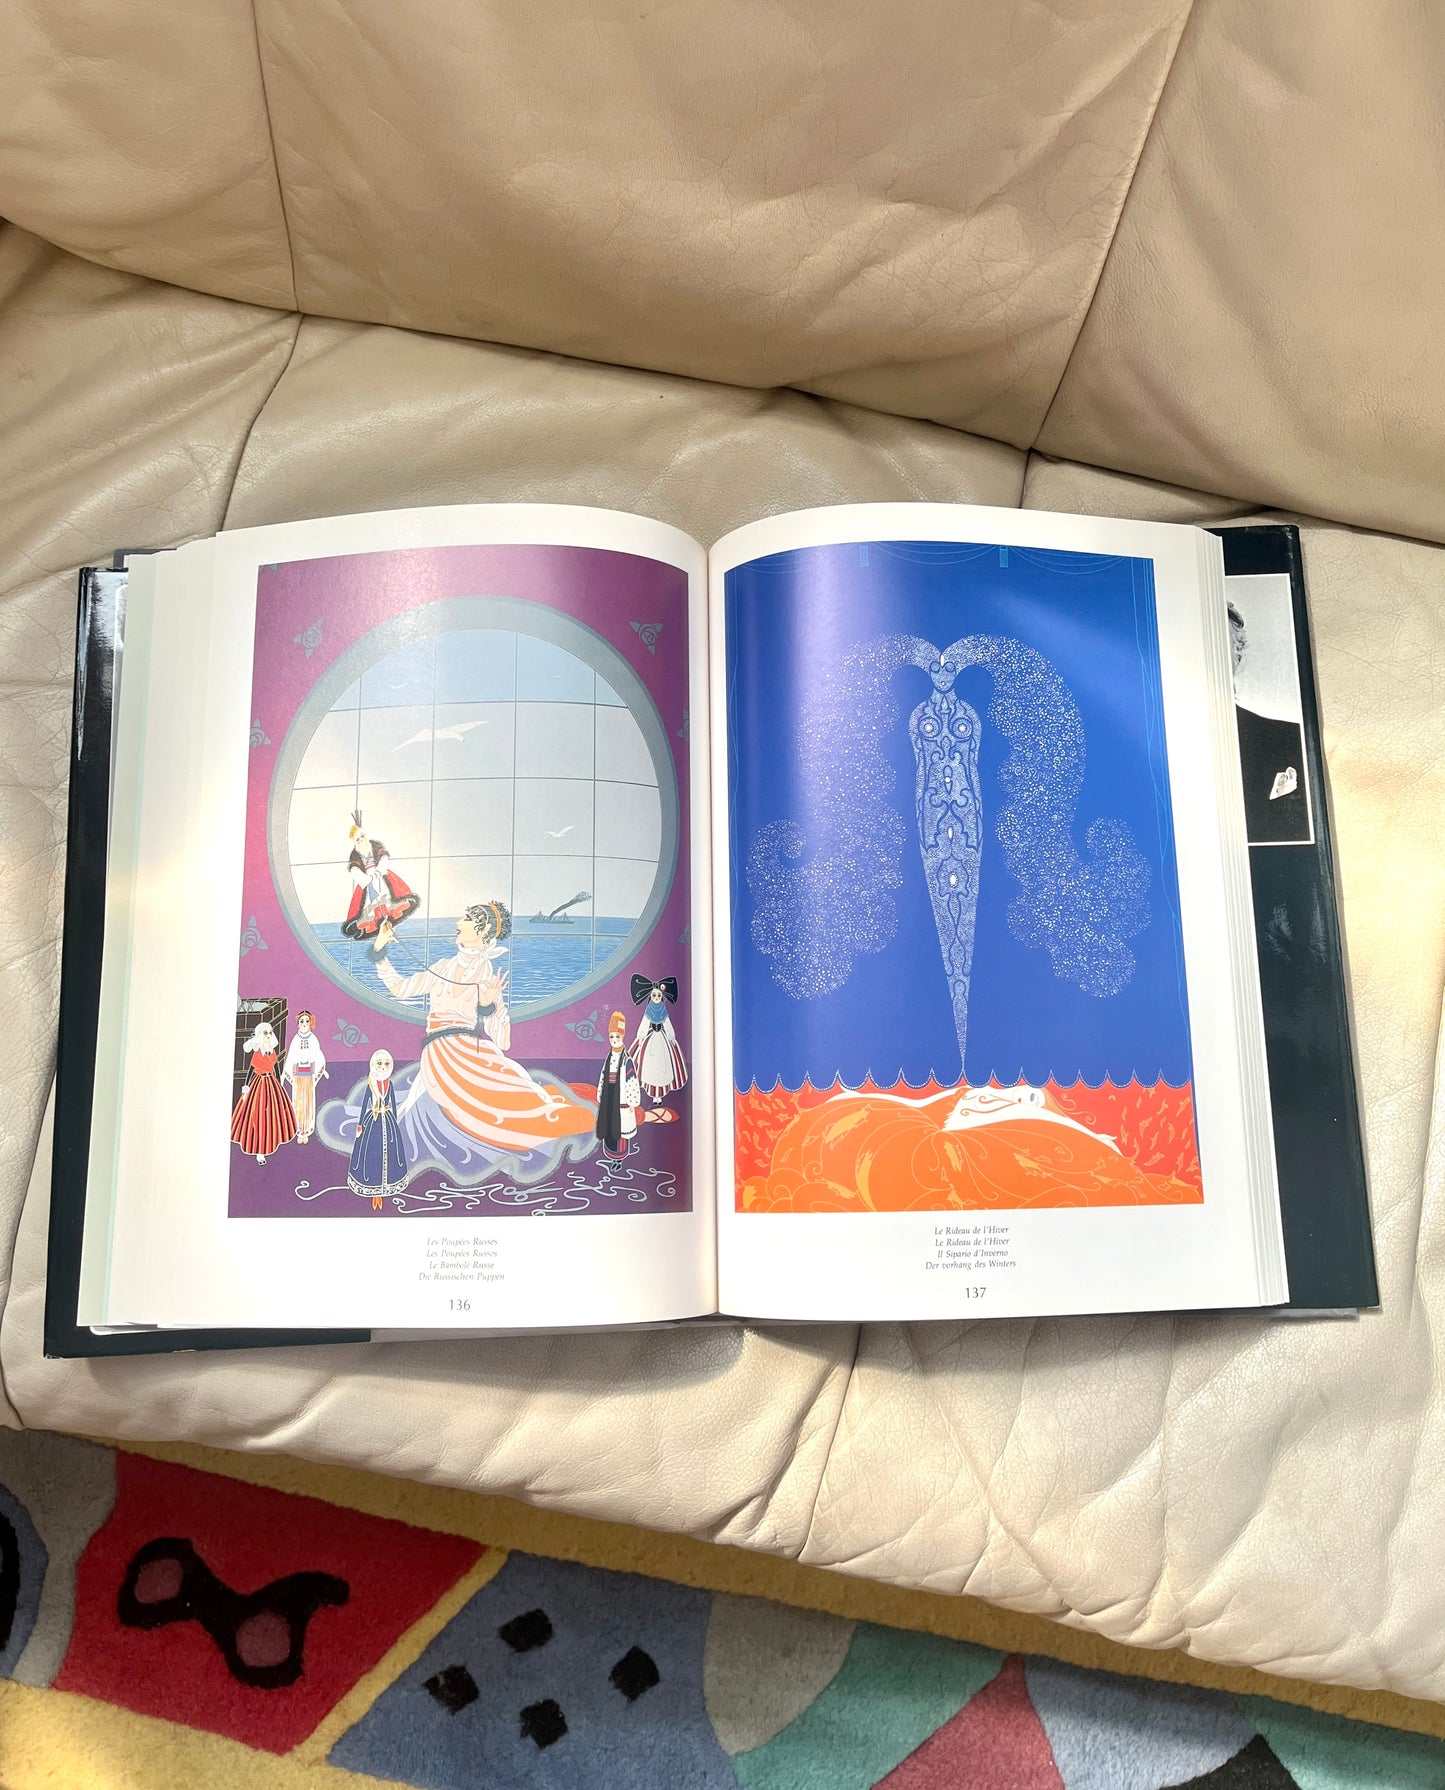 Erté at Ninety: The Complete Graphics